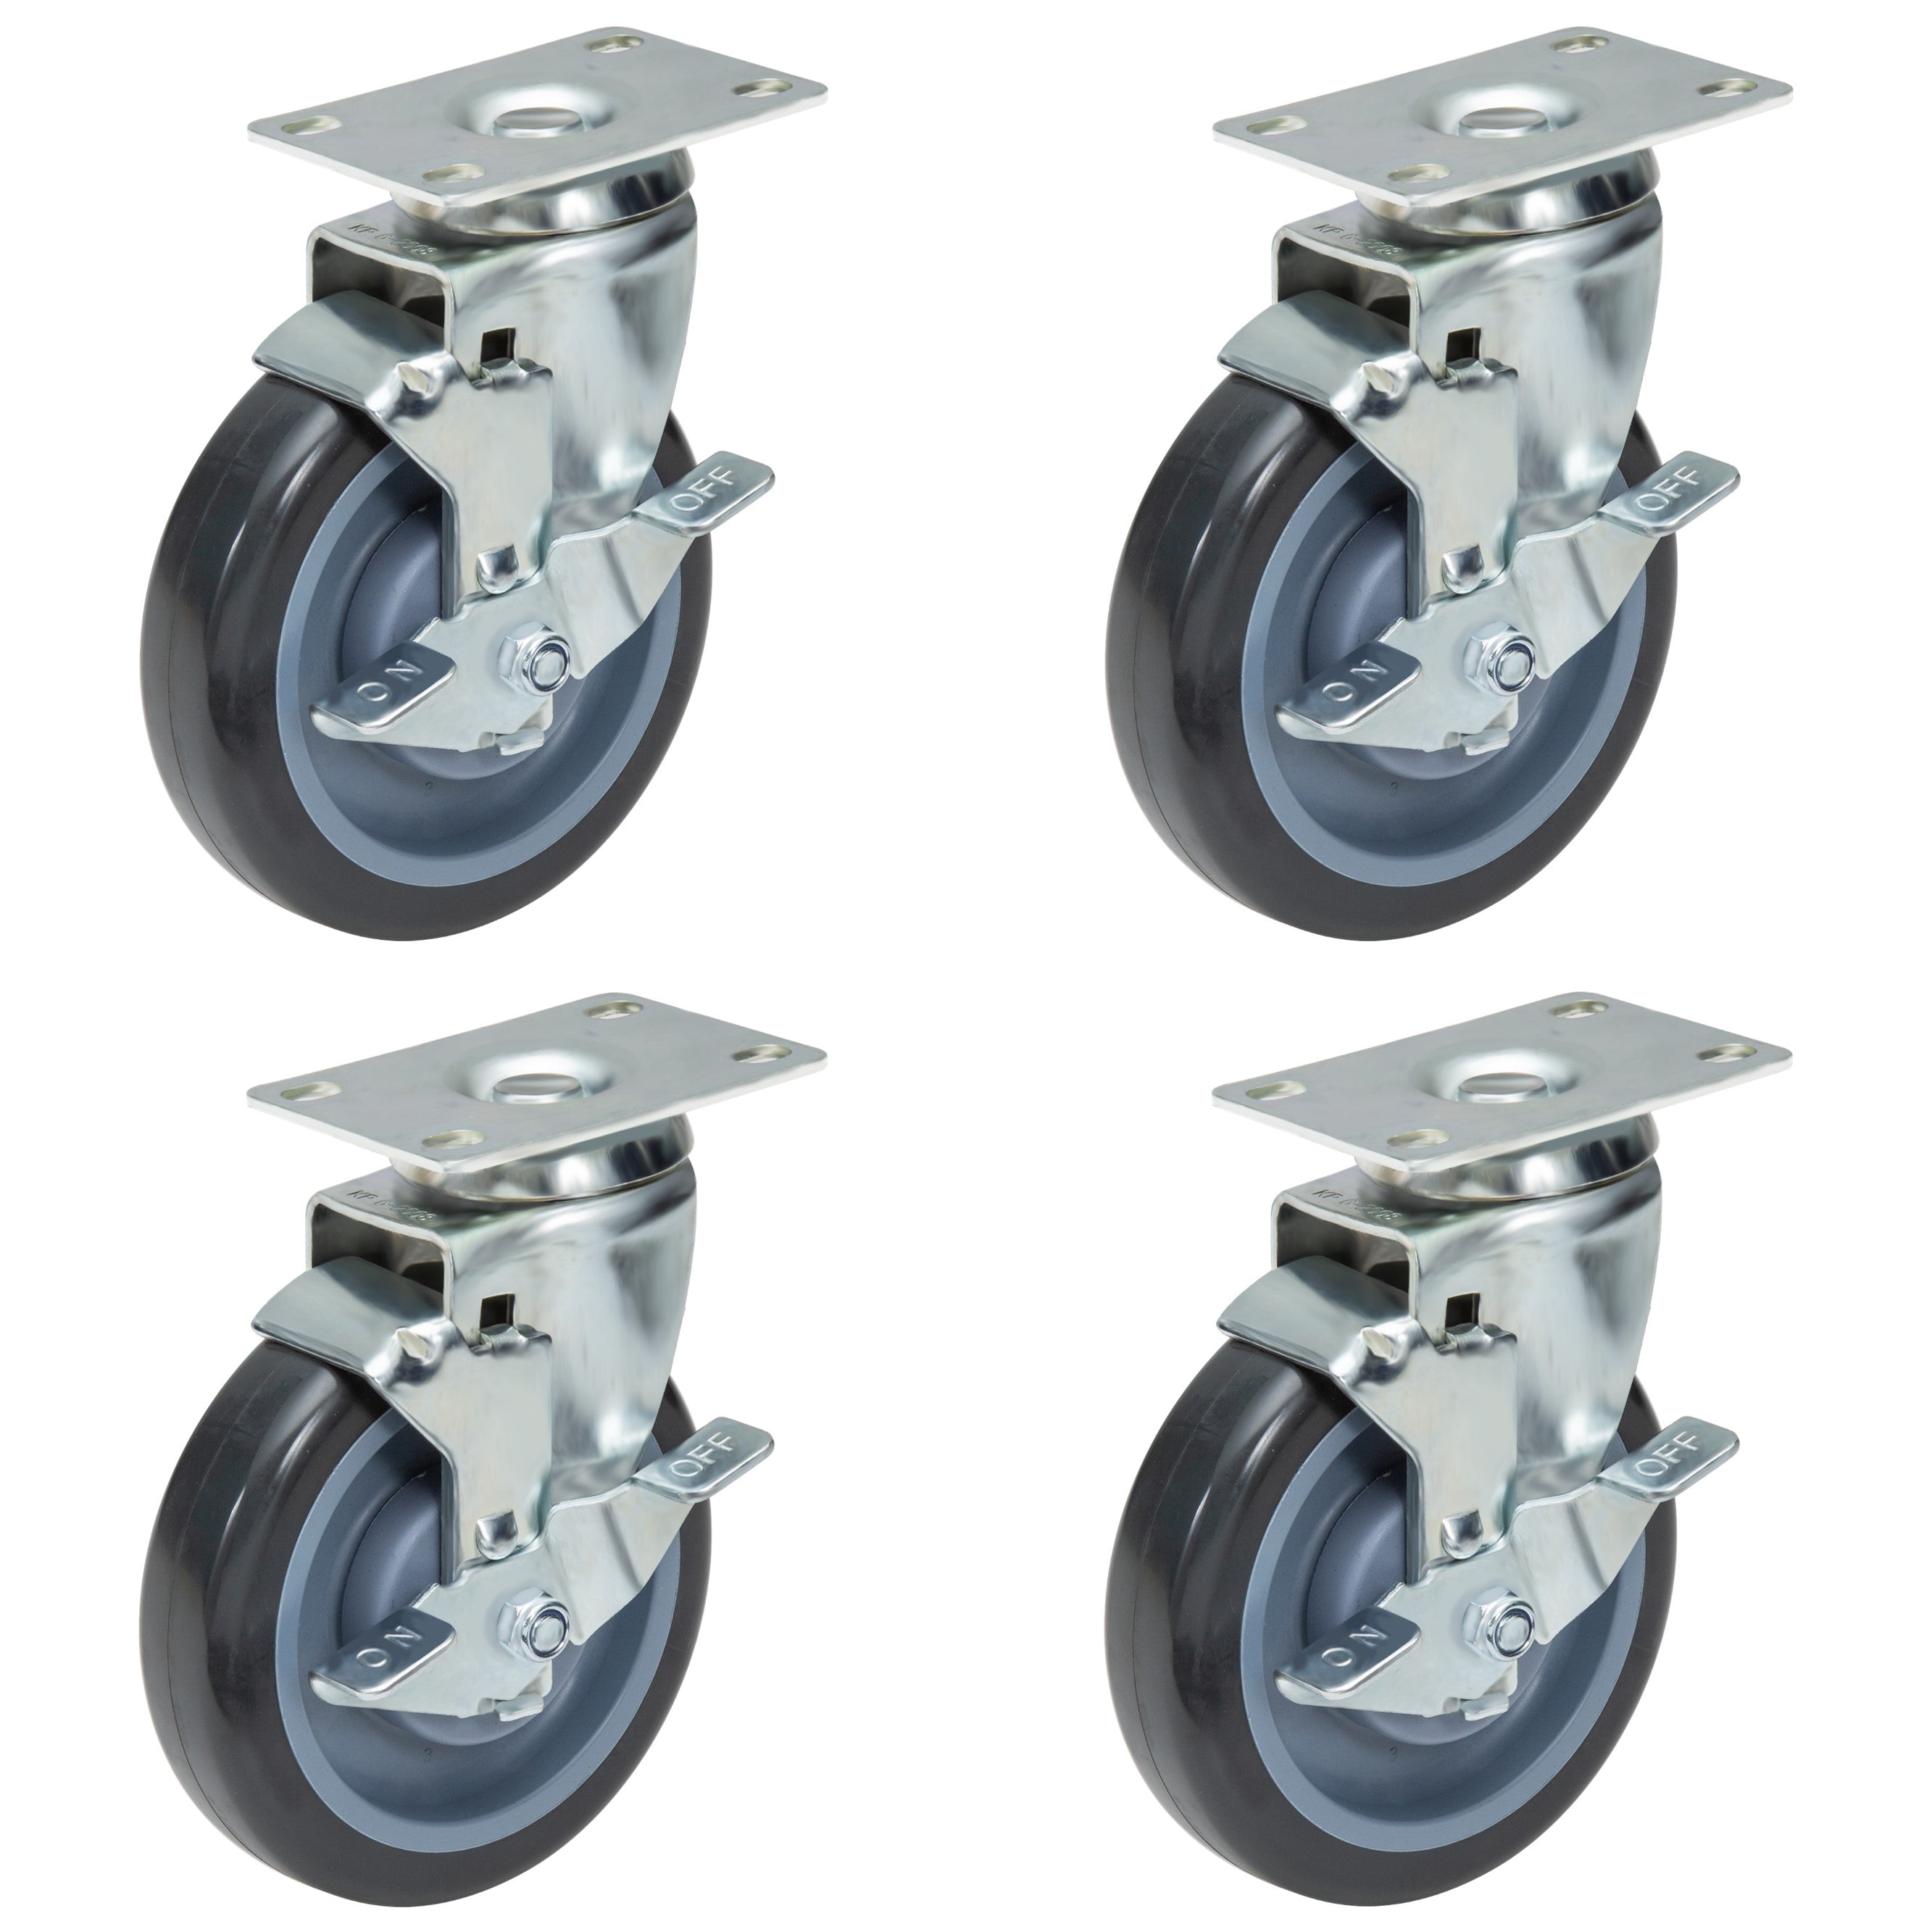 GSW 3" Plate Caster Set of 4, Industrial Casters with Capacity 1160 LBs, Heavy Duty Casters - Use for Inventory Carts, Workbench, Platform Cart (Swivel with Brake)